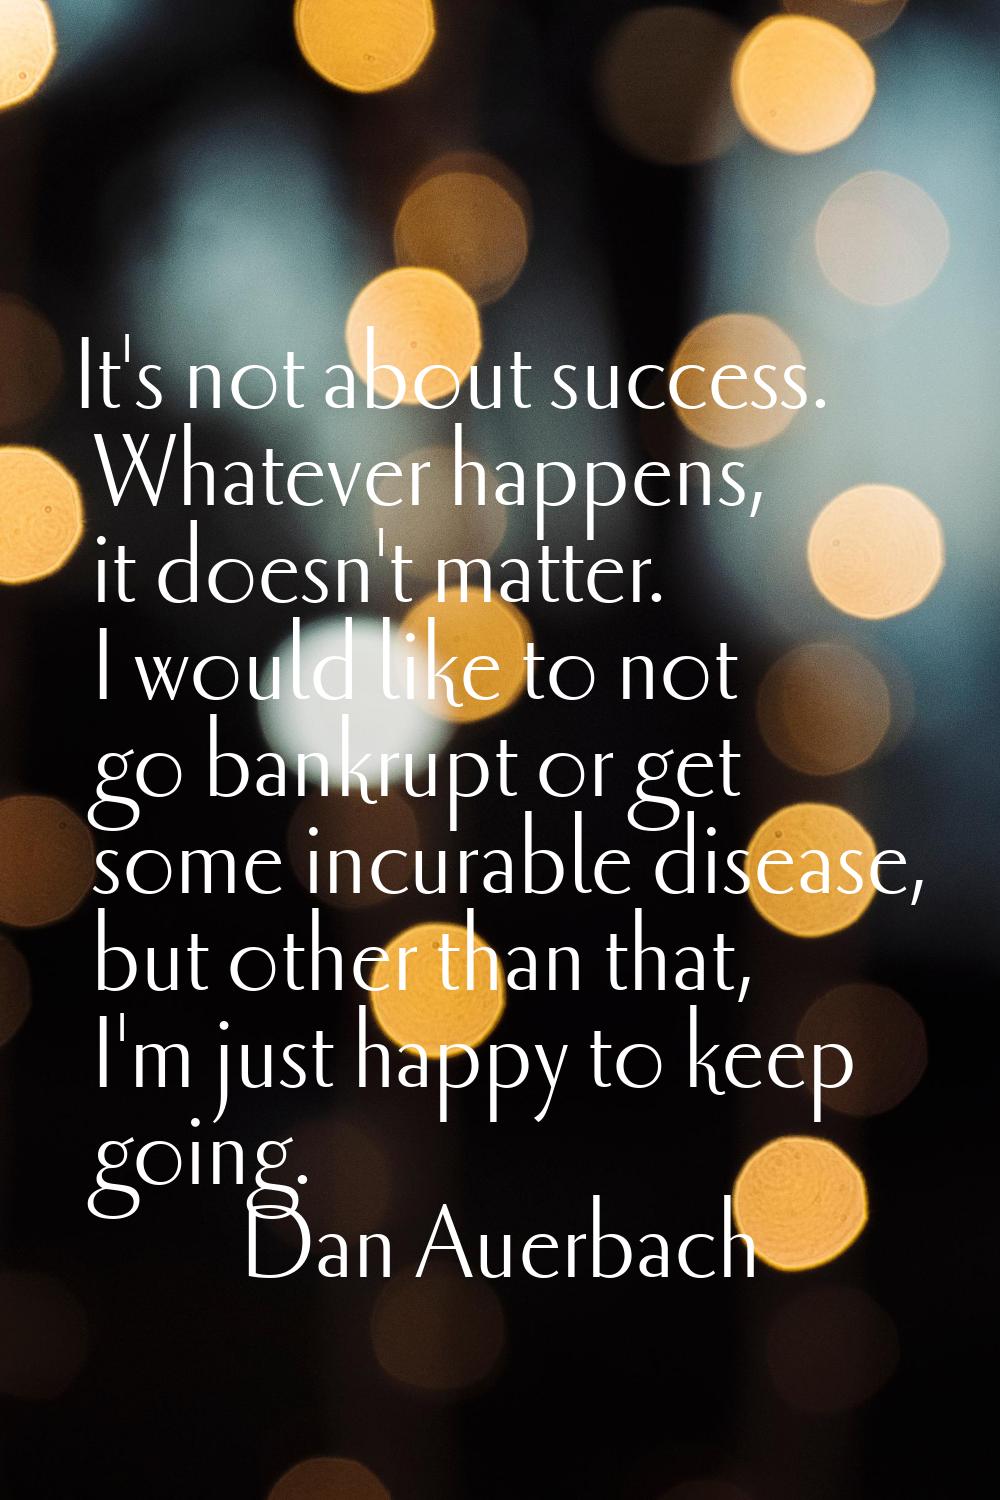 It's not about success. Whatever happens, it doesn't matter. I would like to not go bankrupt or get